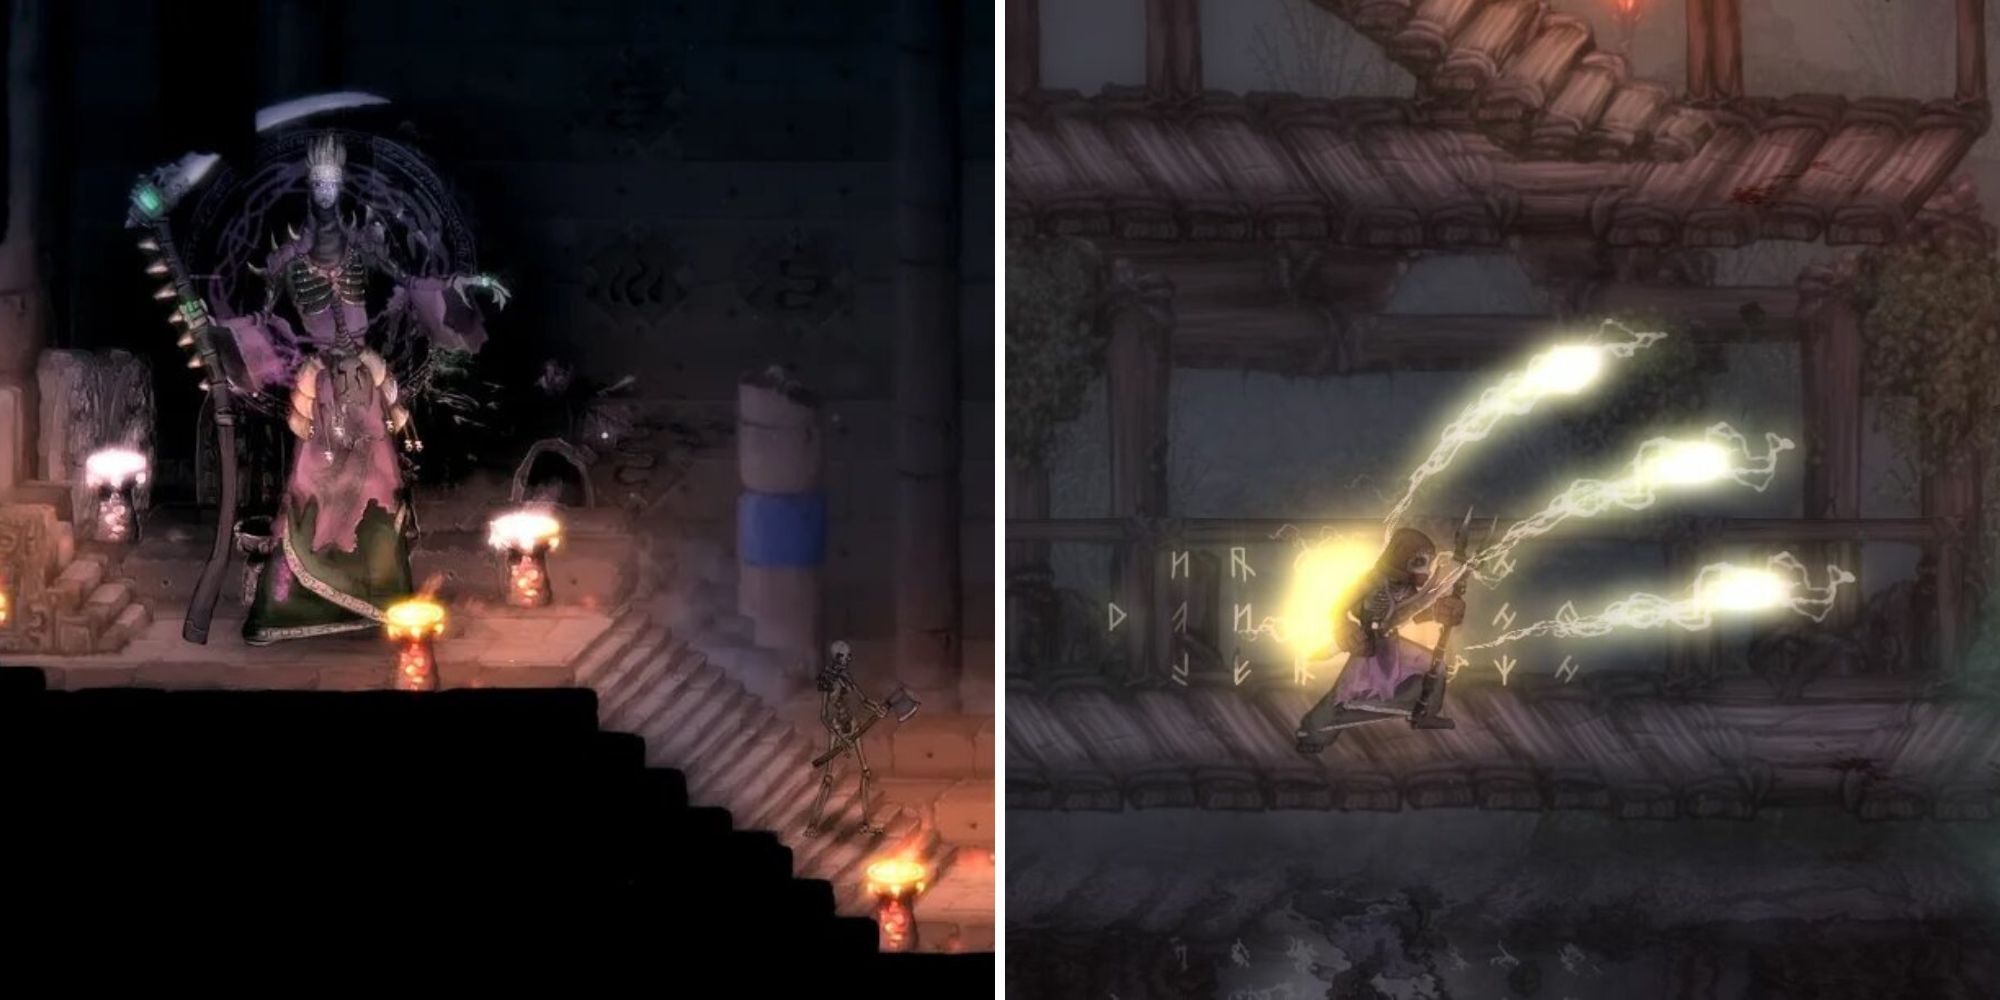 On the left is a large skeleton boss and on the right is a character using magic in Salt and Sacrifice